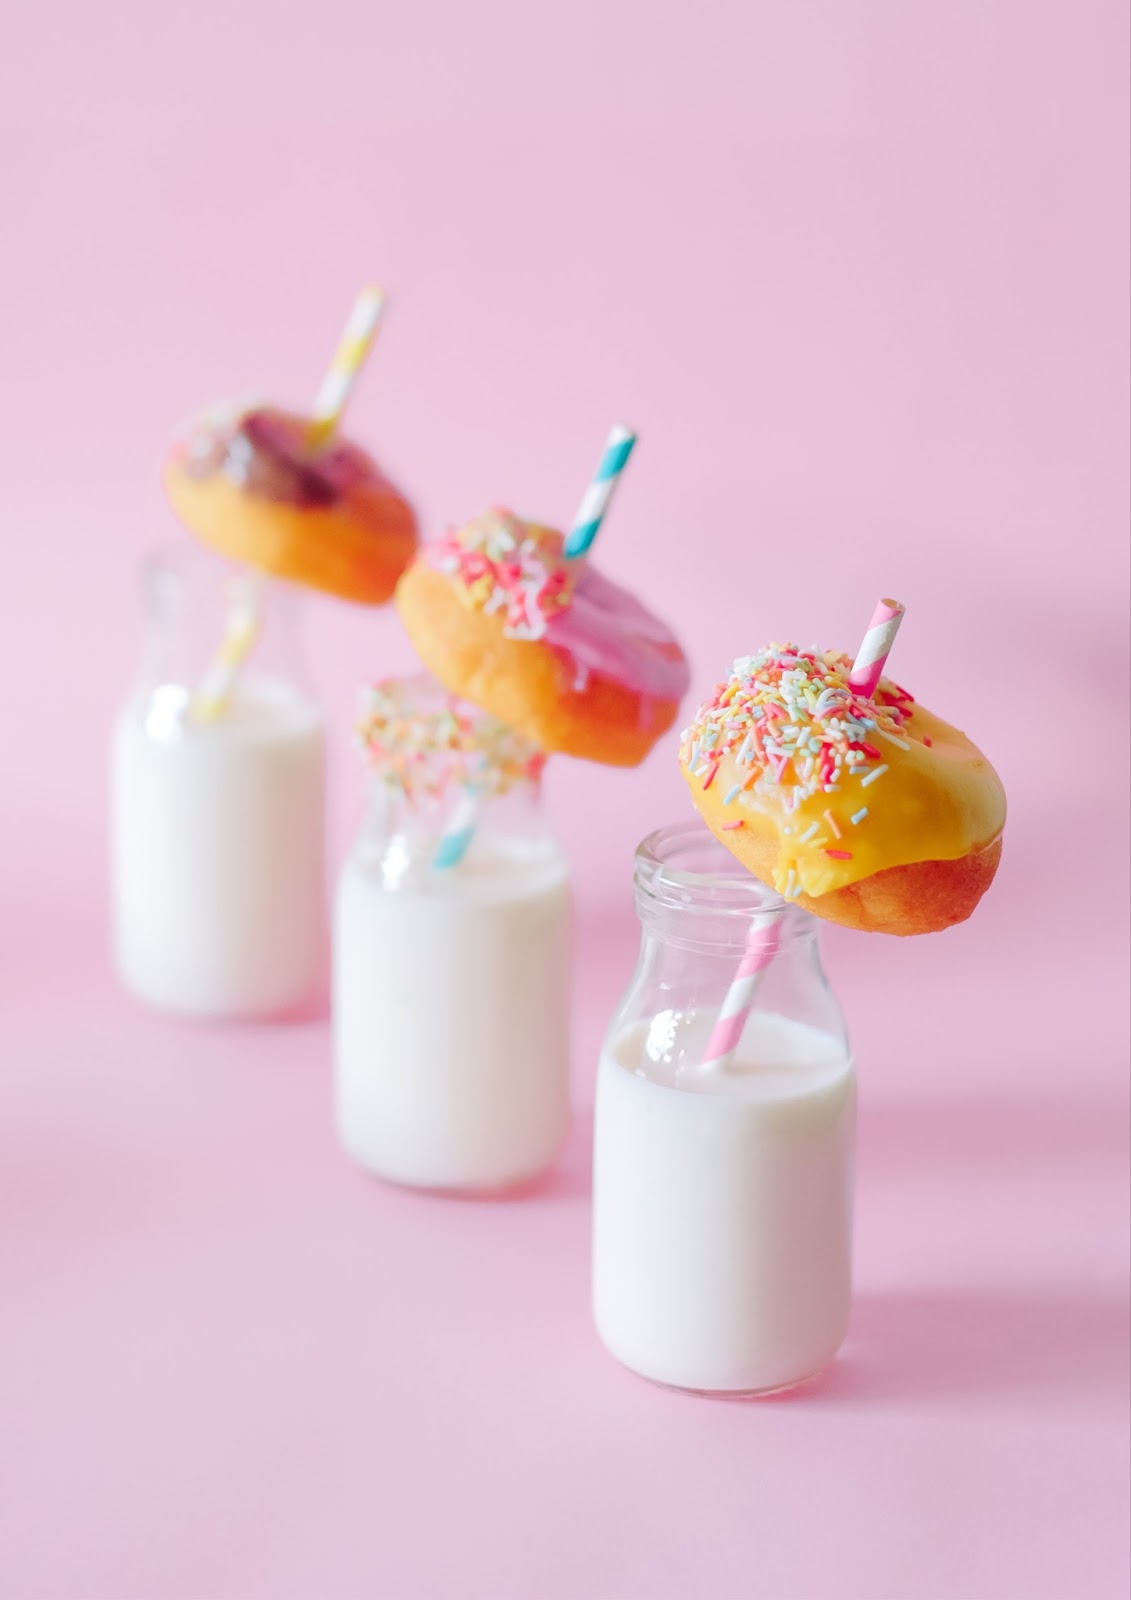 Glass bottles of milk with colorful straws and frosted donuts are pictured on a pink background. A dessert bar is another creative use for our mobile bar, Pearl.